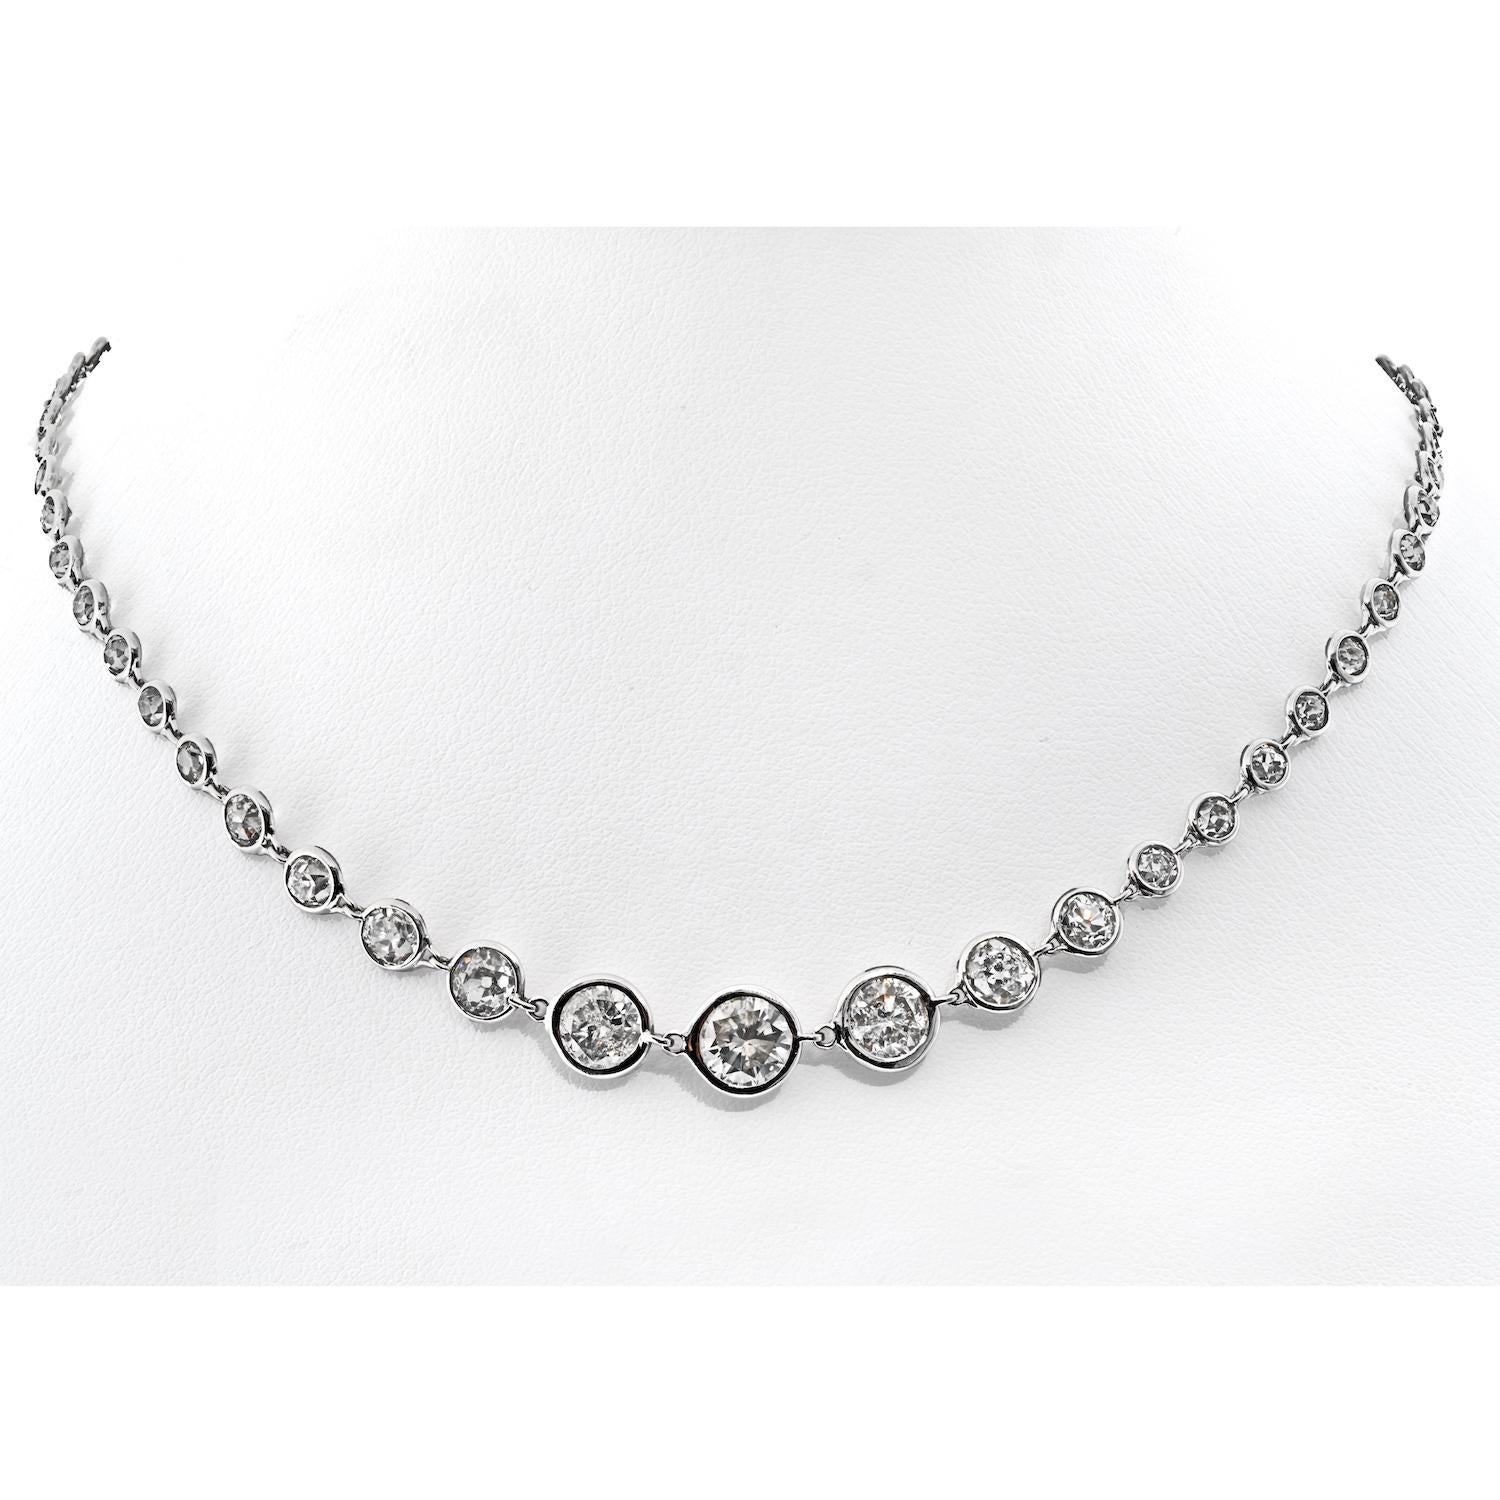 Indulge in the epitome of luxury with this breathtaking 18K White Gold Diamond Choker Necklace, boasting a total diamond weight of 10.58 carats. The diamonds, carefully selected for their quality, exhibit a captivating brilliance and fire, with a